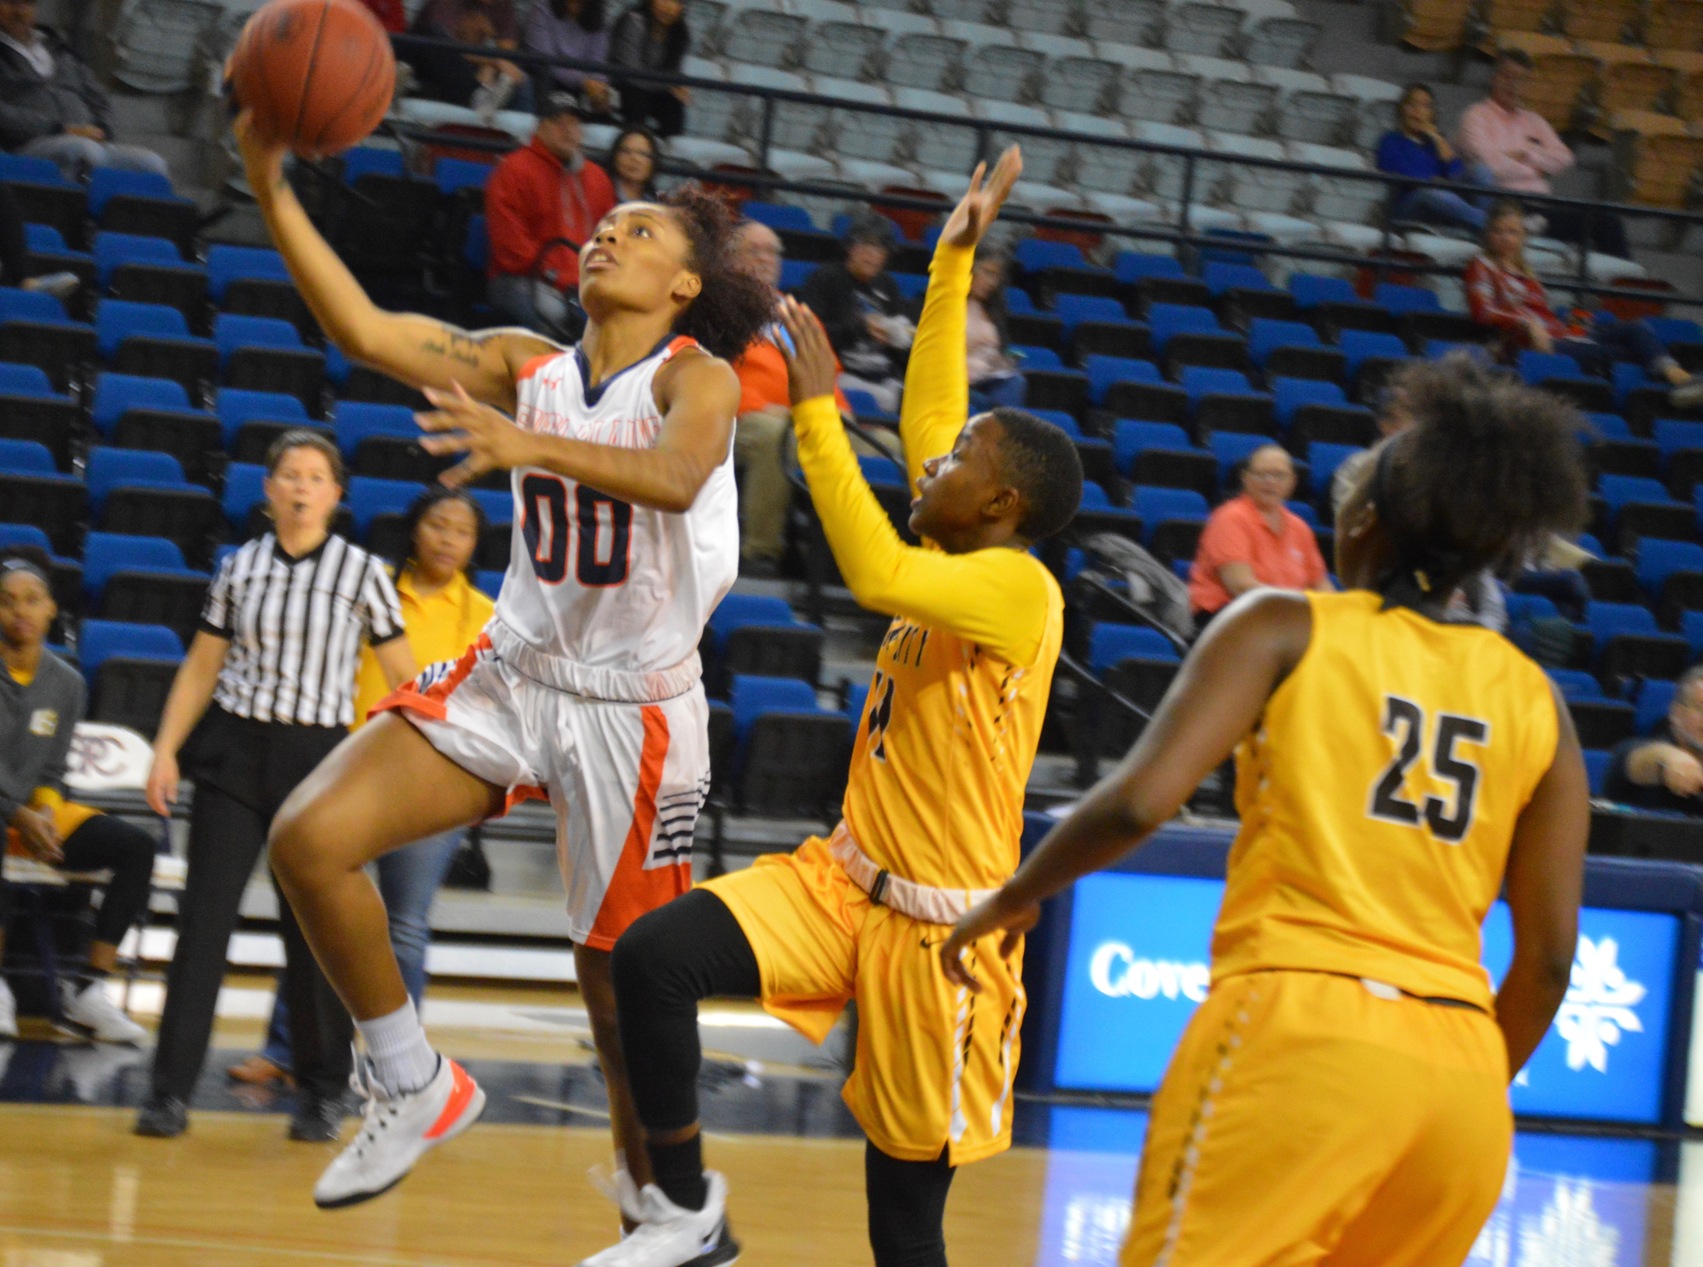 Kuehne scores 17, No.16 Lady Texans trounce Garden City 60-35 in home opener on Tuesday